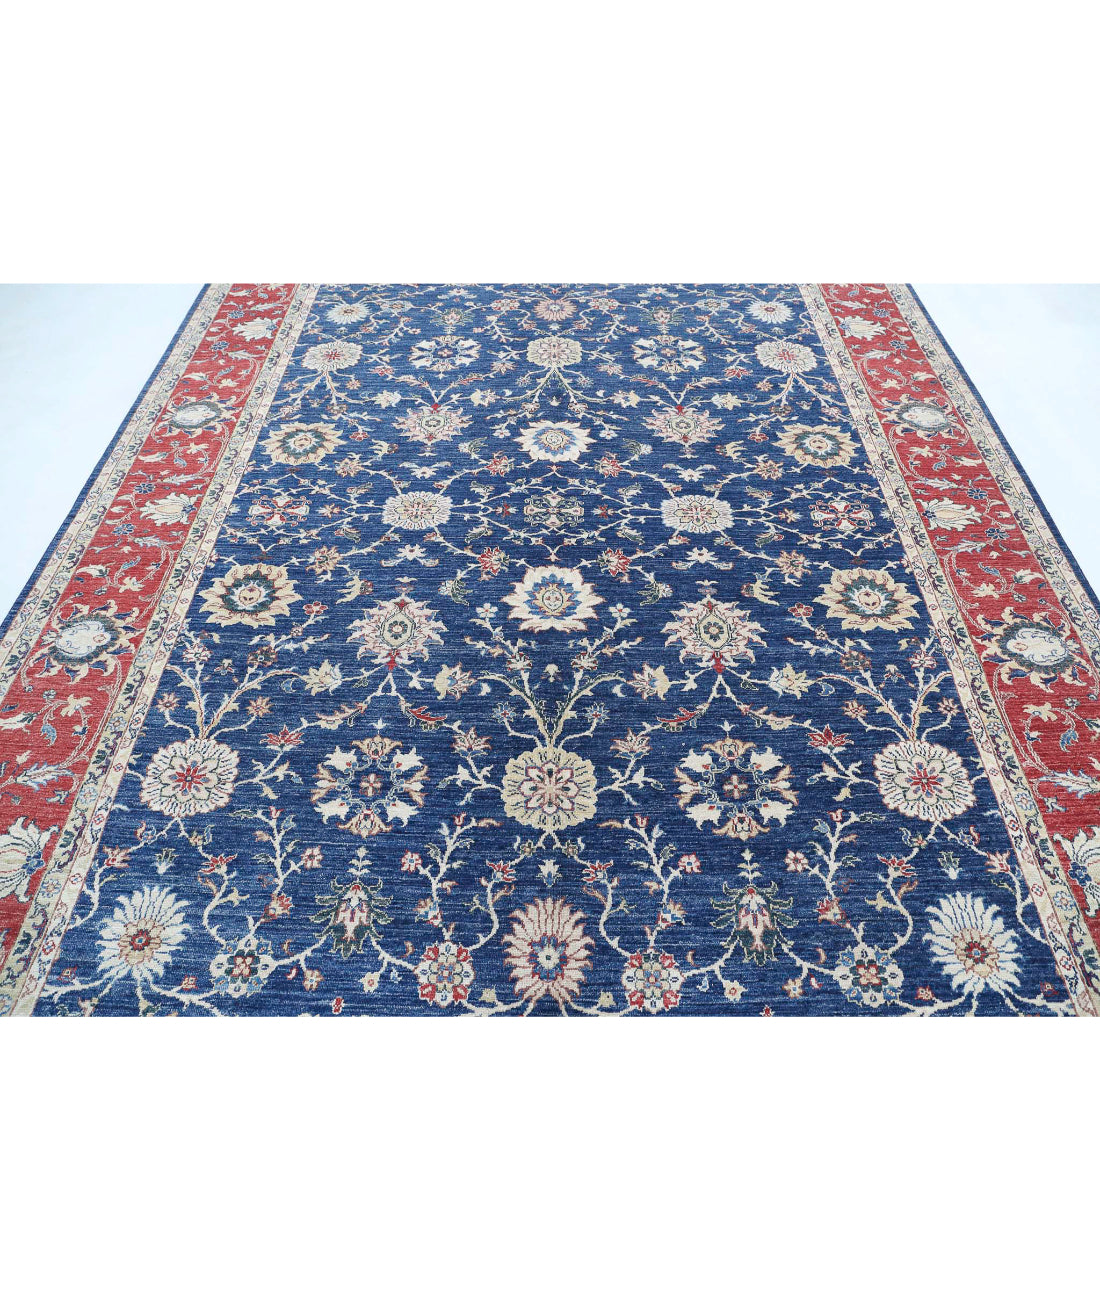 Ziegler 8'3'' X 10'9'' Hand-Knotted Wool Rug 8'3'' x 10'9'' (248 X 323) / Blue / Red